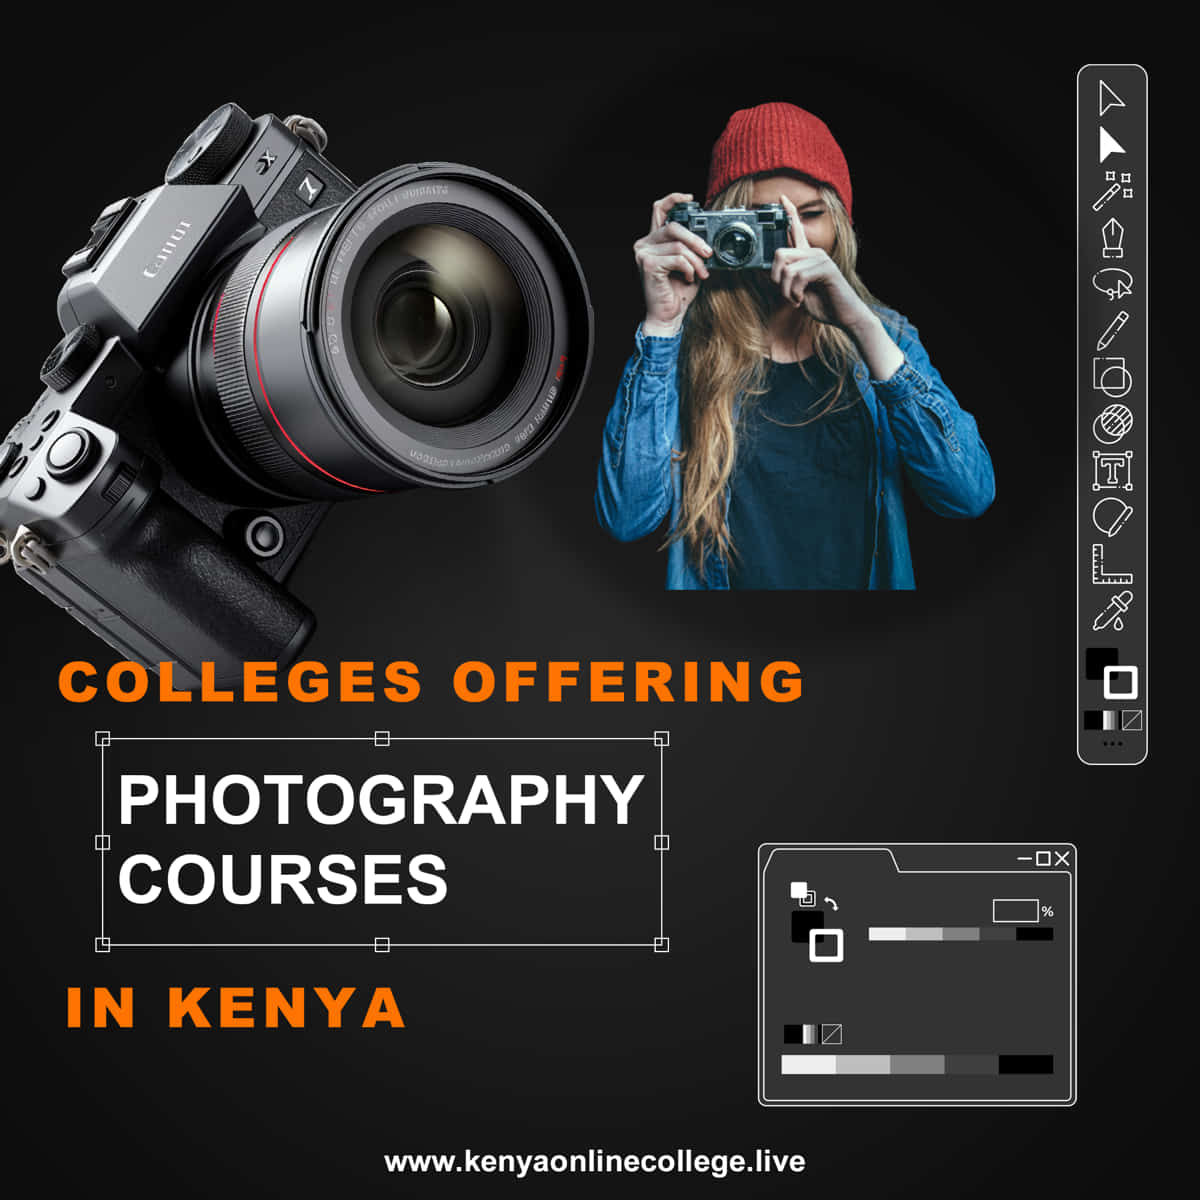 Colleges offering photography courses in Kenya